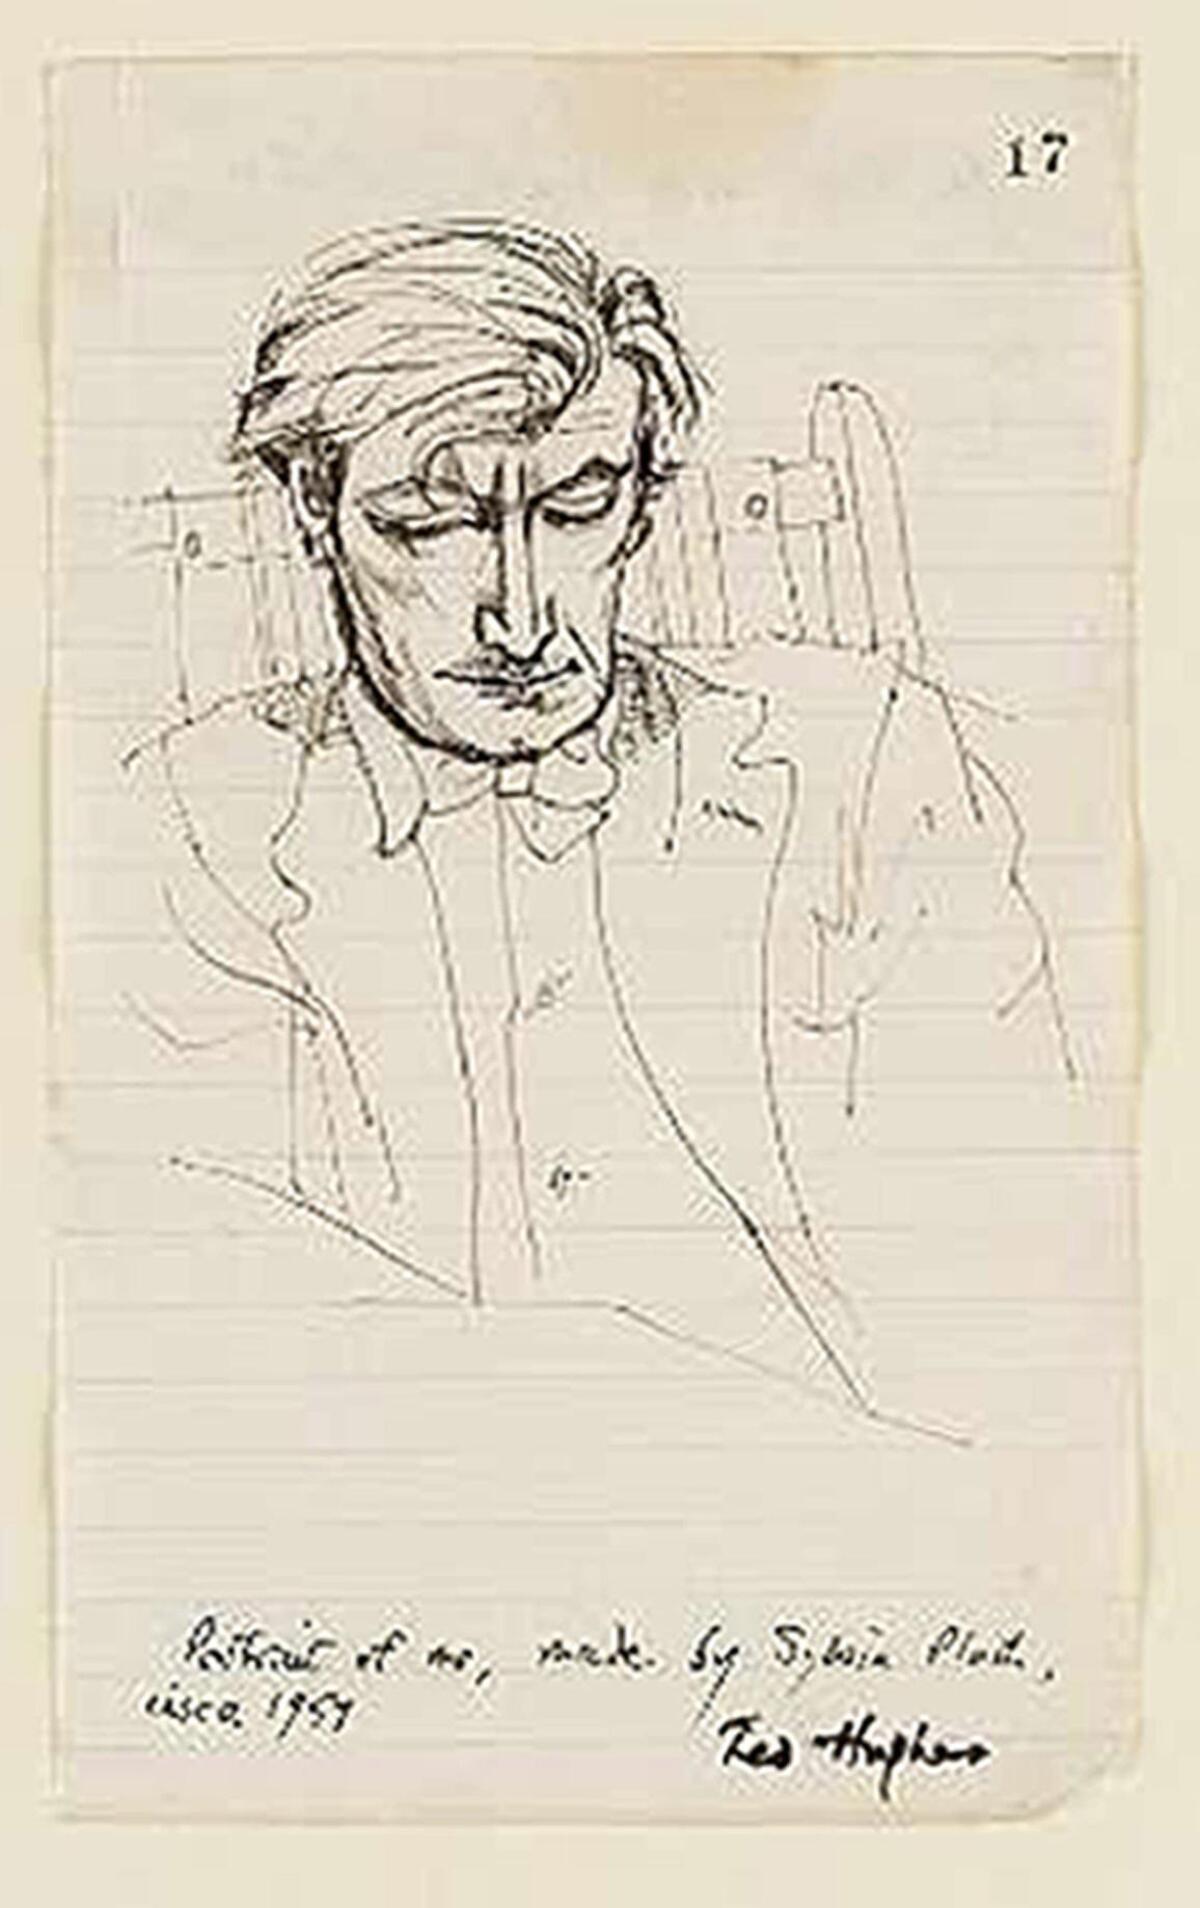 A portrait of the late poet laureate Ted Hughes by his wife and fellow poet Sylvia Plath.